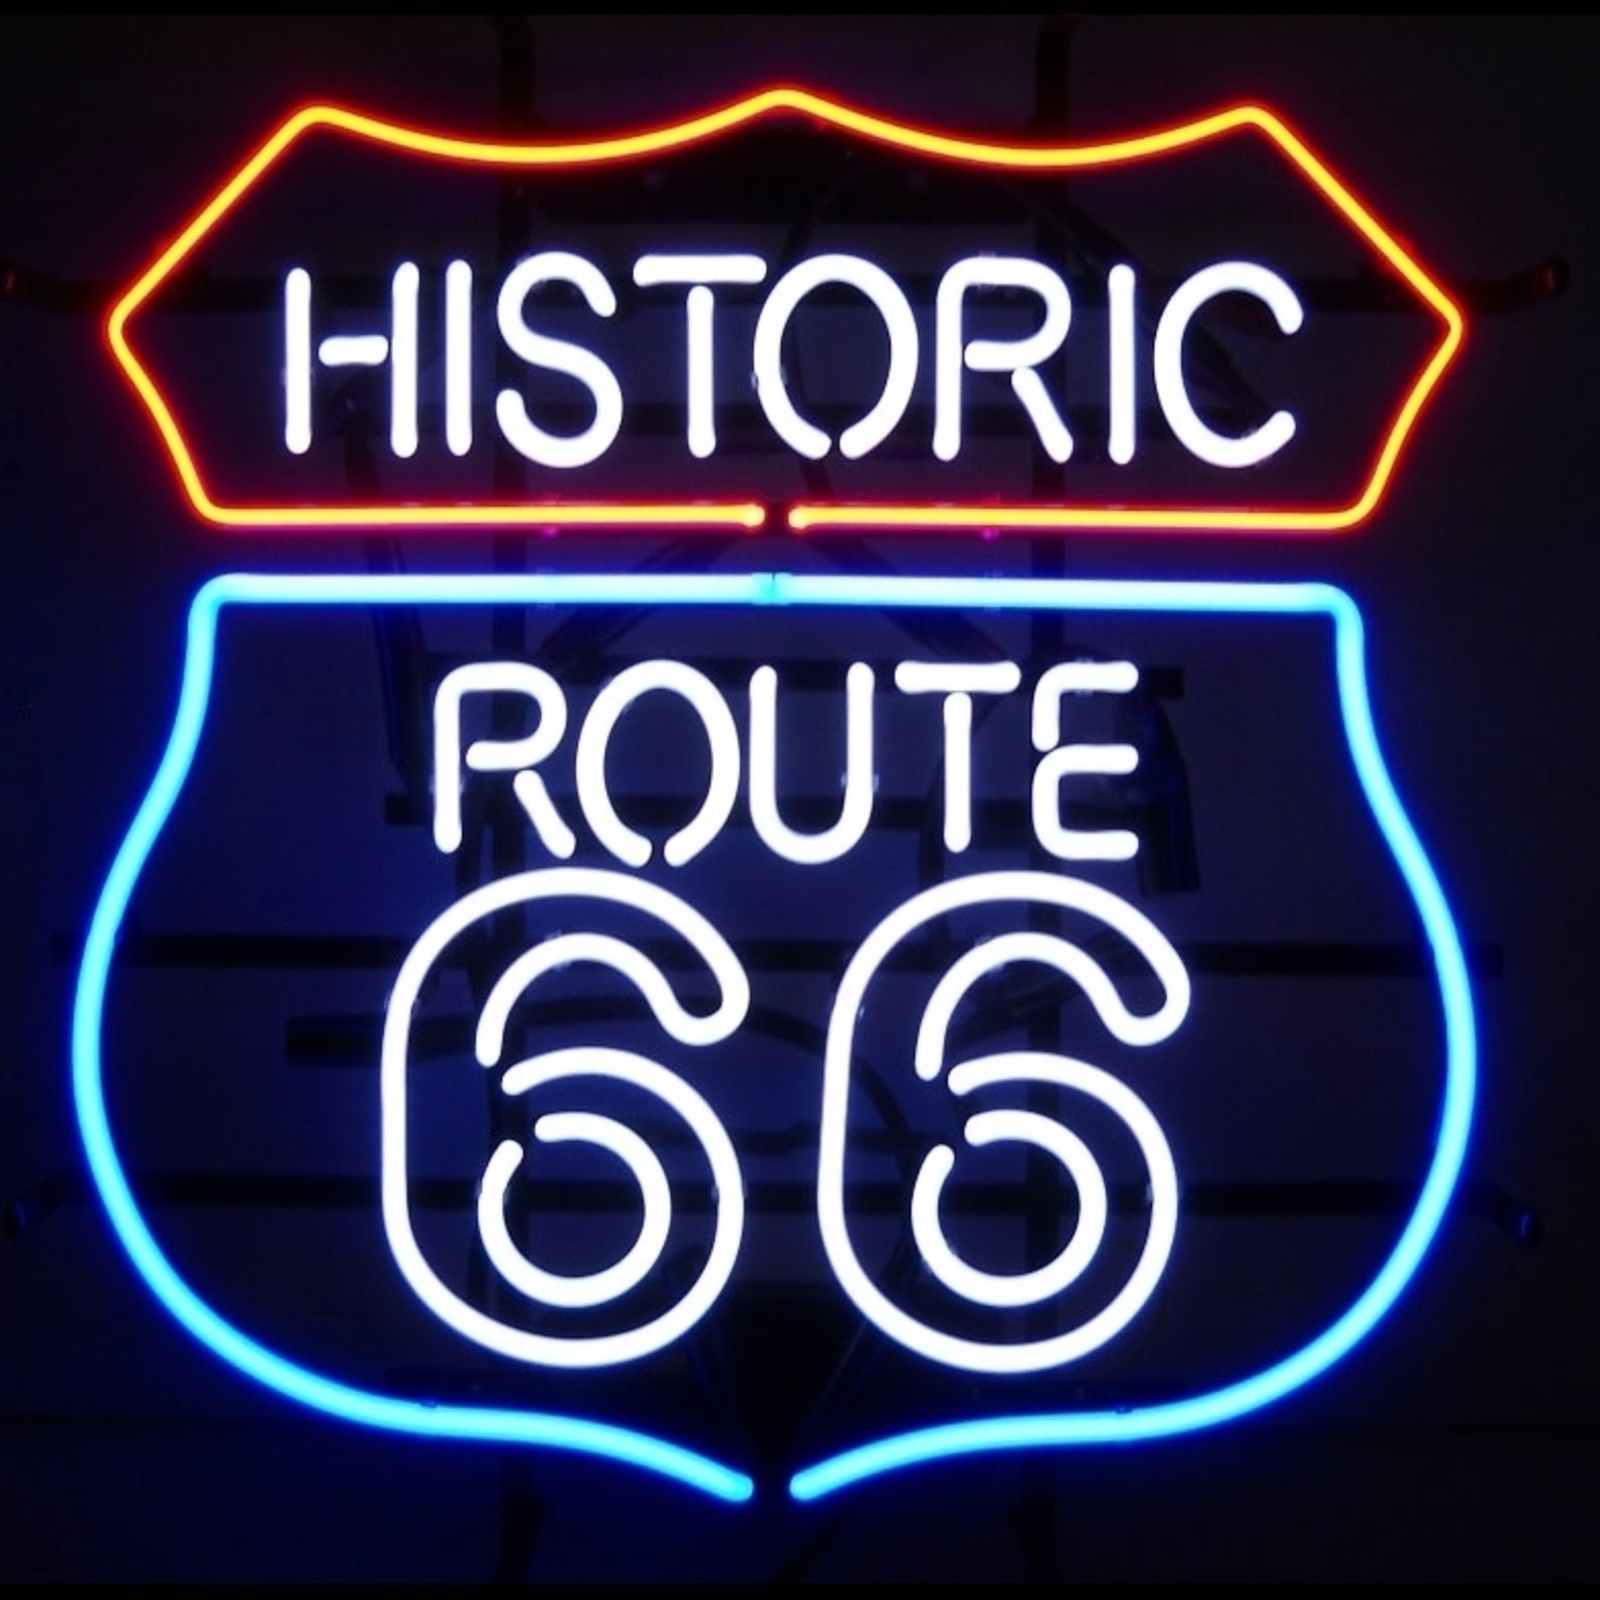 Historic Route 66 Highway Neon Sign 16"x15"  - $139.00